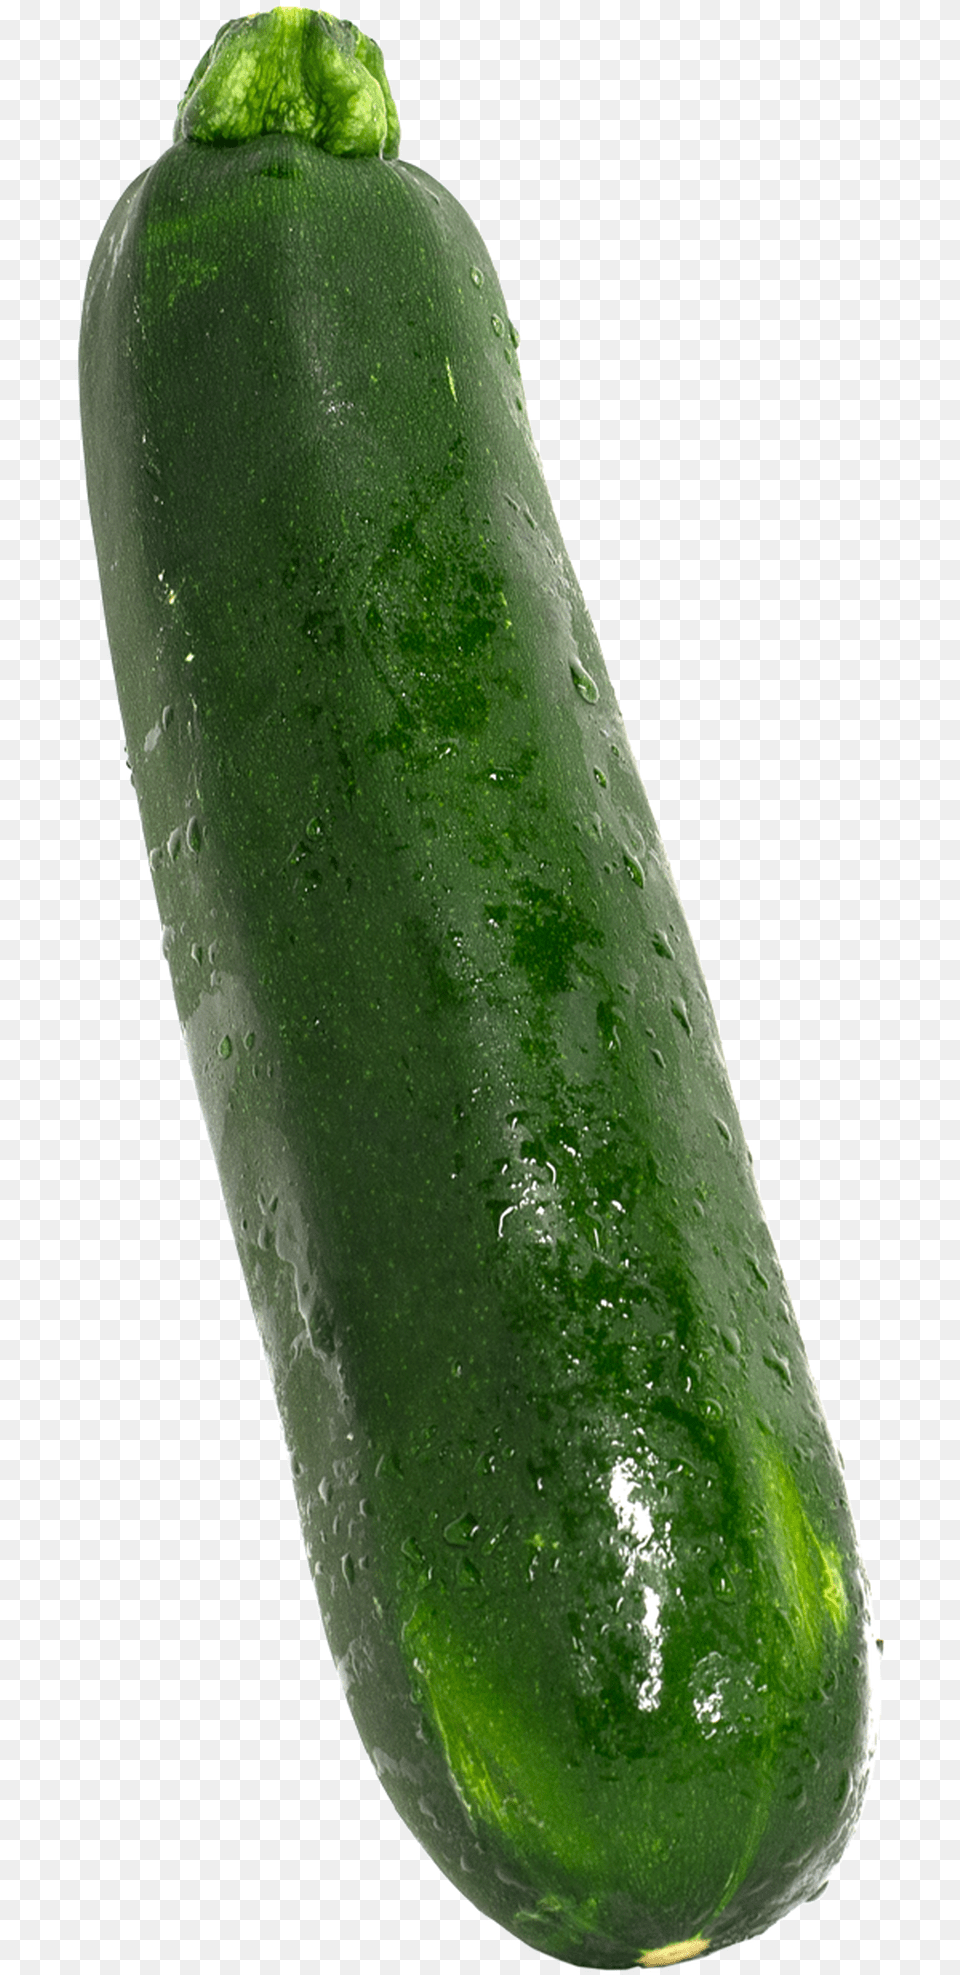 Zucchini 1 Lb Cucumber, Food, Produce, Plant, Vegetable Png